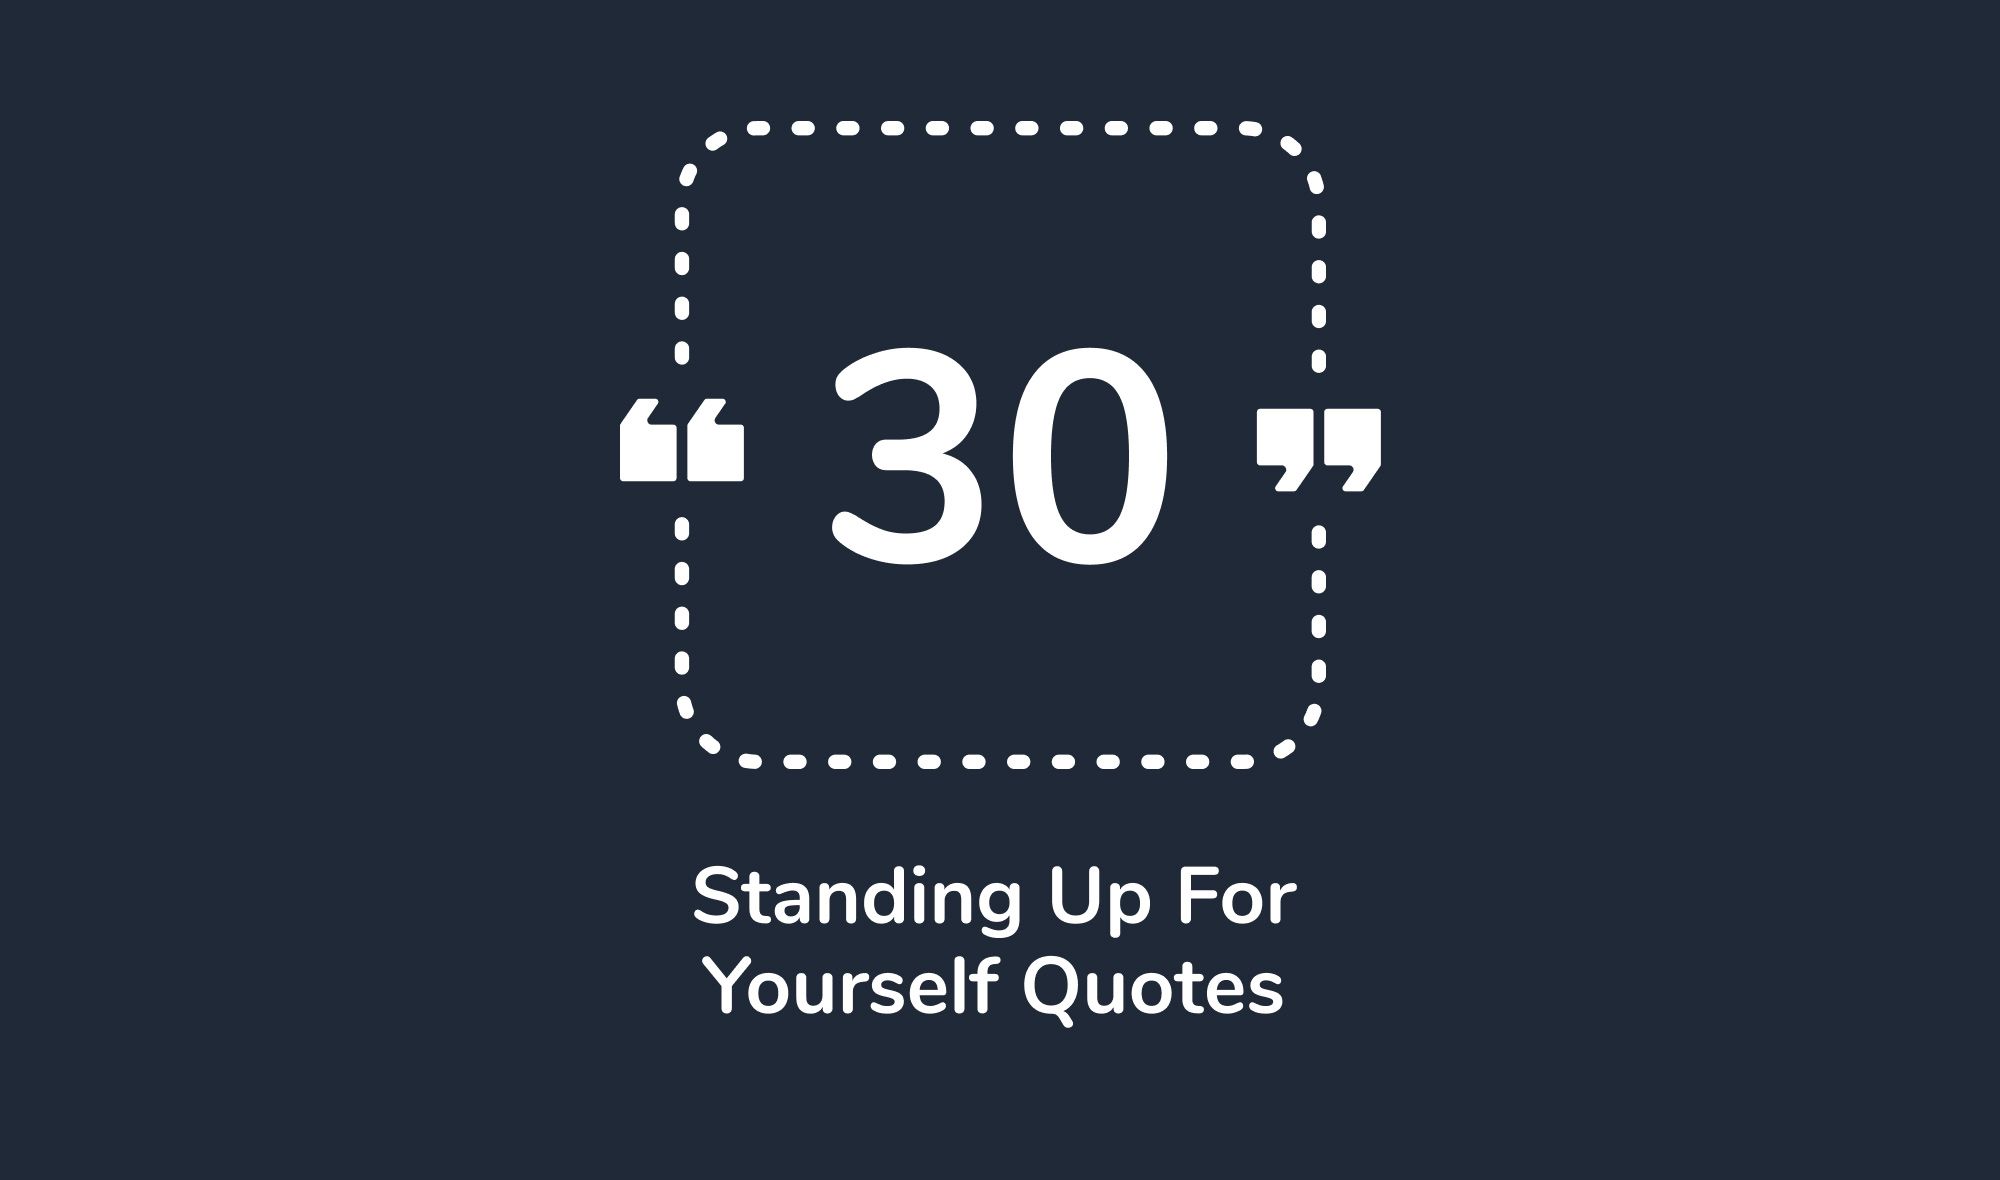 30 standing up for yourself quotes